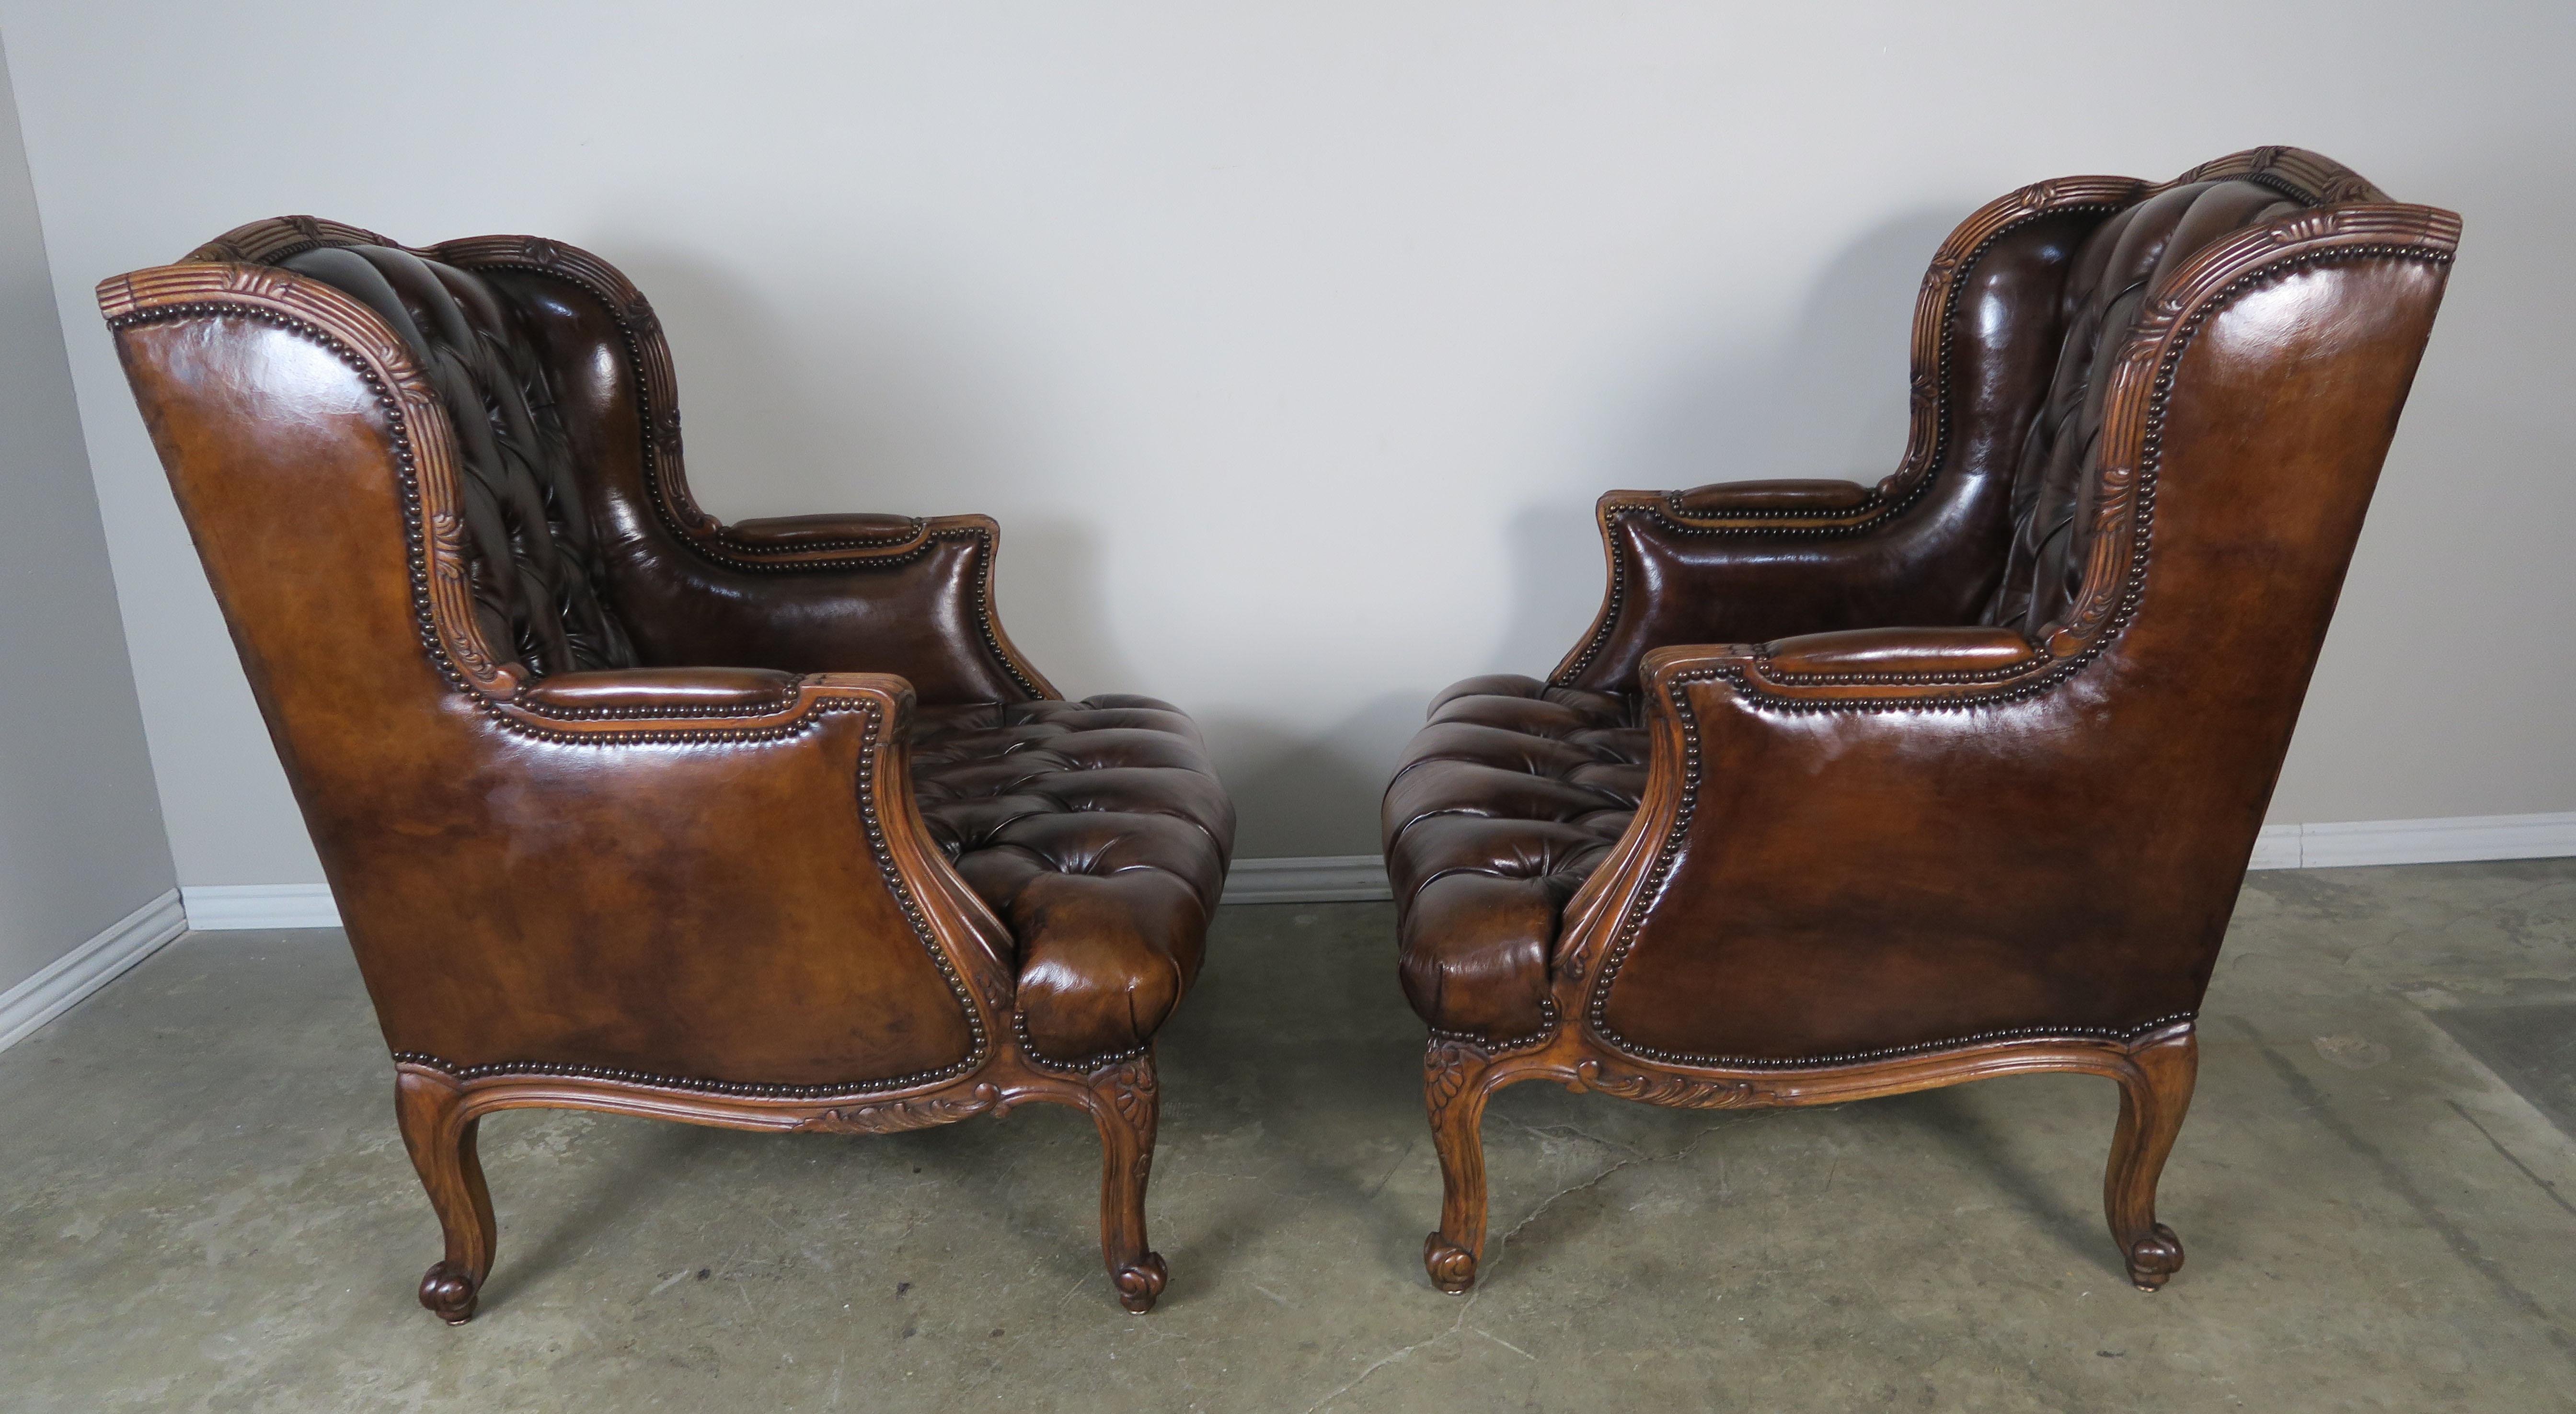 Pair of French Leather Tufted Armchairs with Matching Ottomans 1